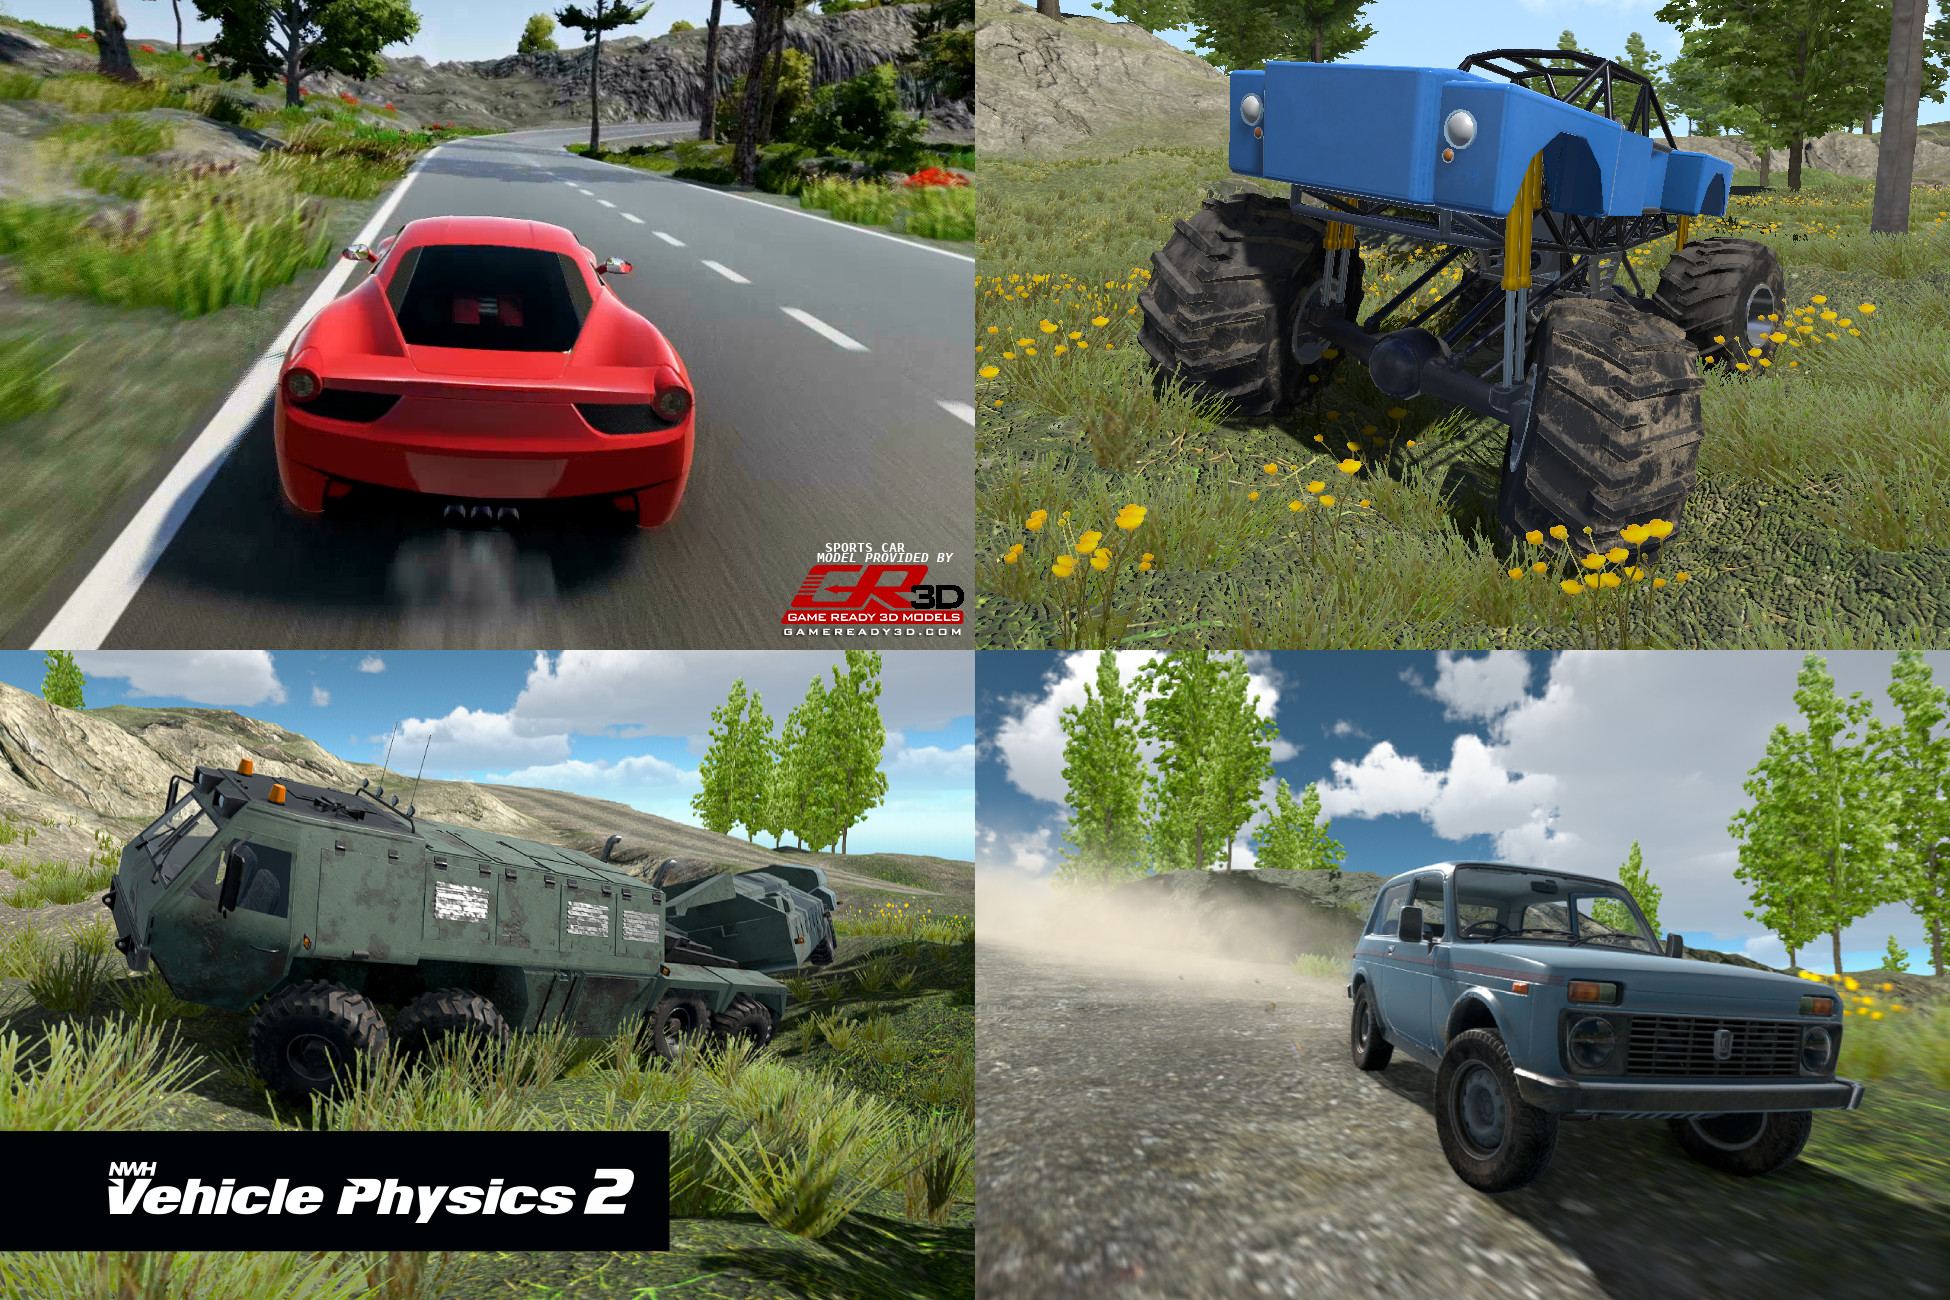 toon vehicles free download unity asset collection.